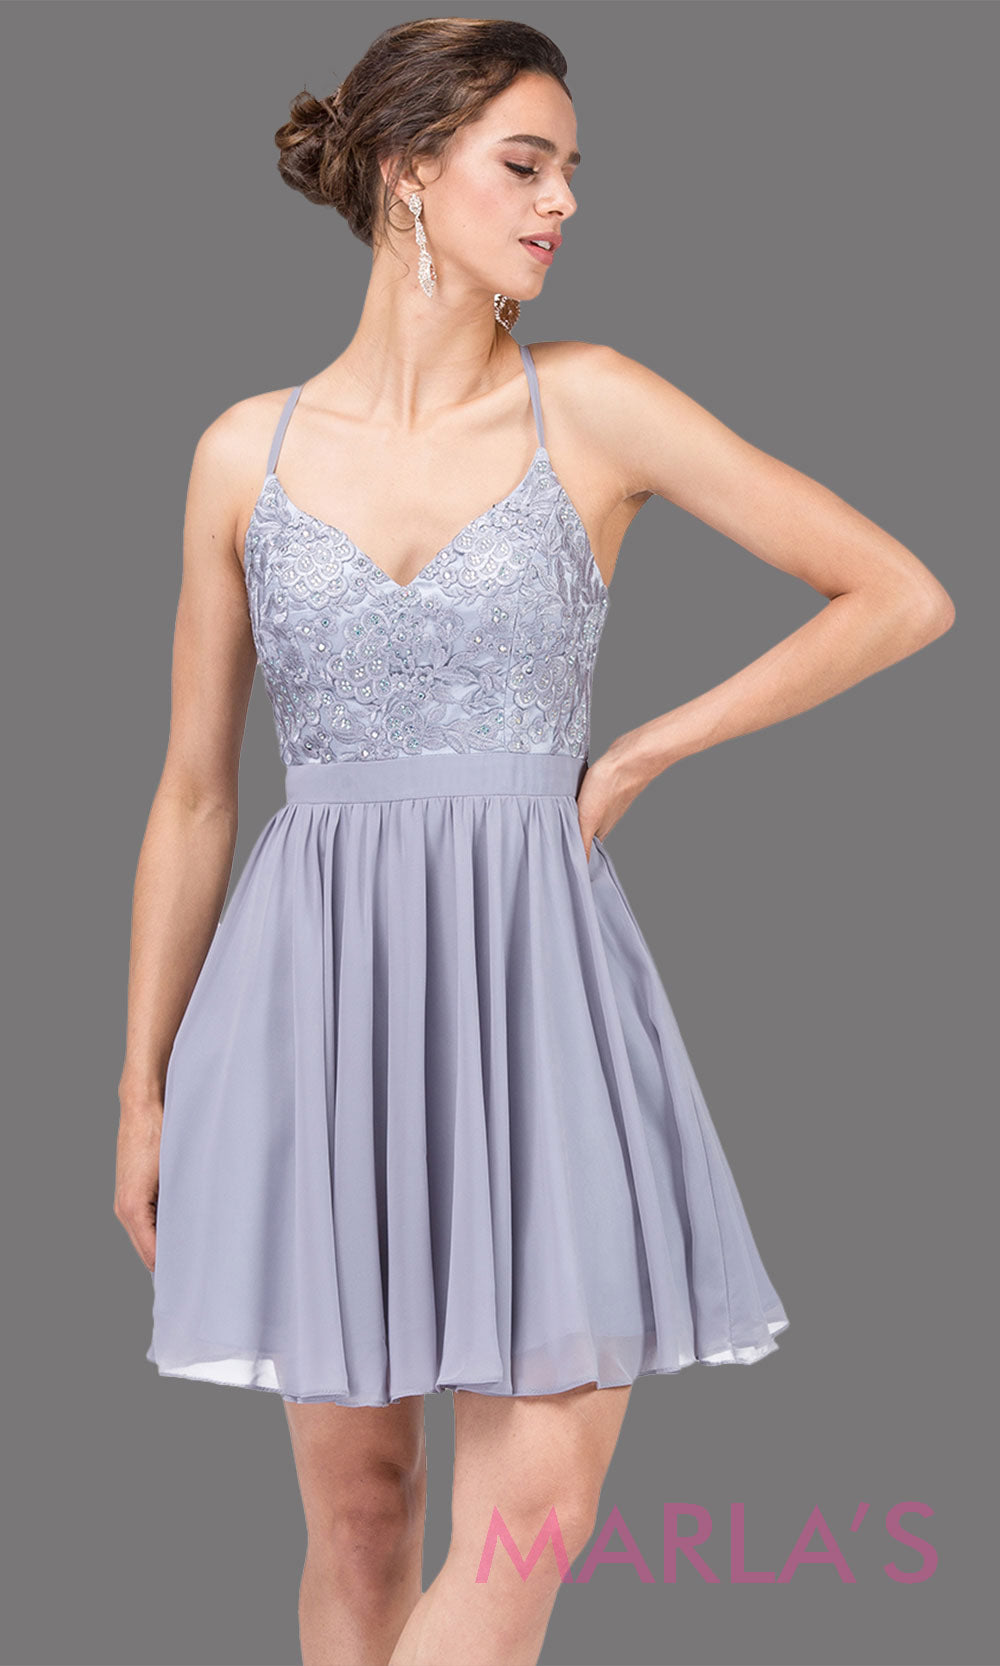 3088.4-Short silver gray flowy chiffon grade 8 grad dress with straps and lace.This v neck light grey graduation dress is great for quinceanera damas, confirmation,bat mitzvah,junior bridesmaid. Plus size Avail